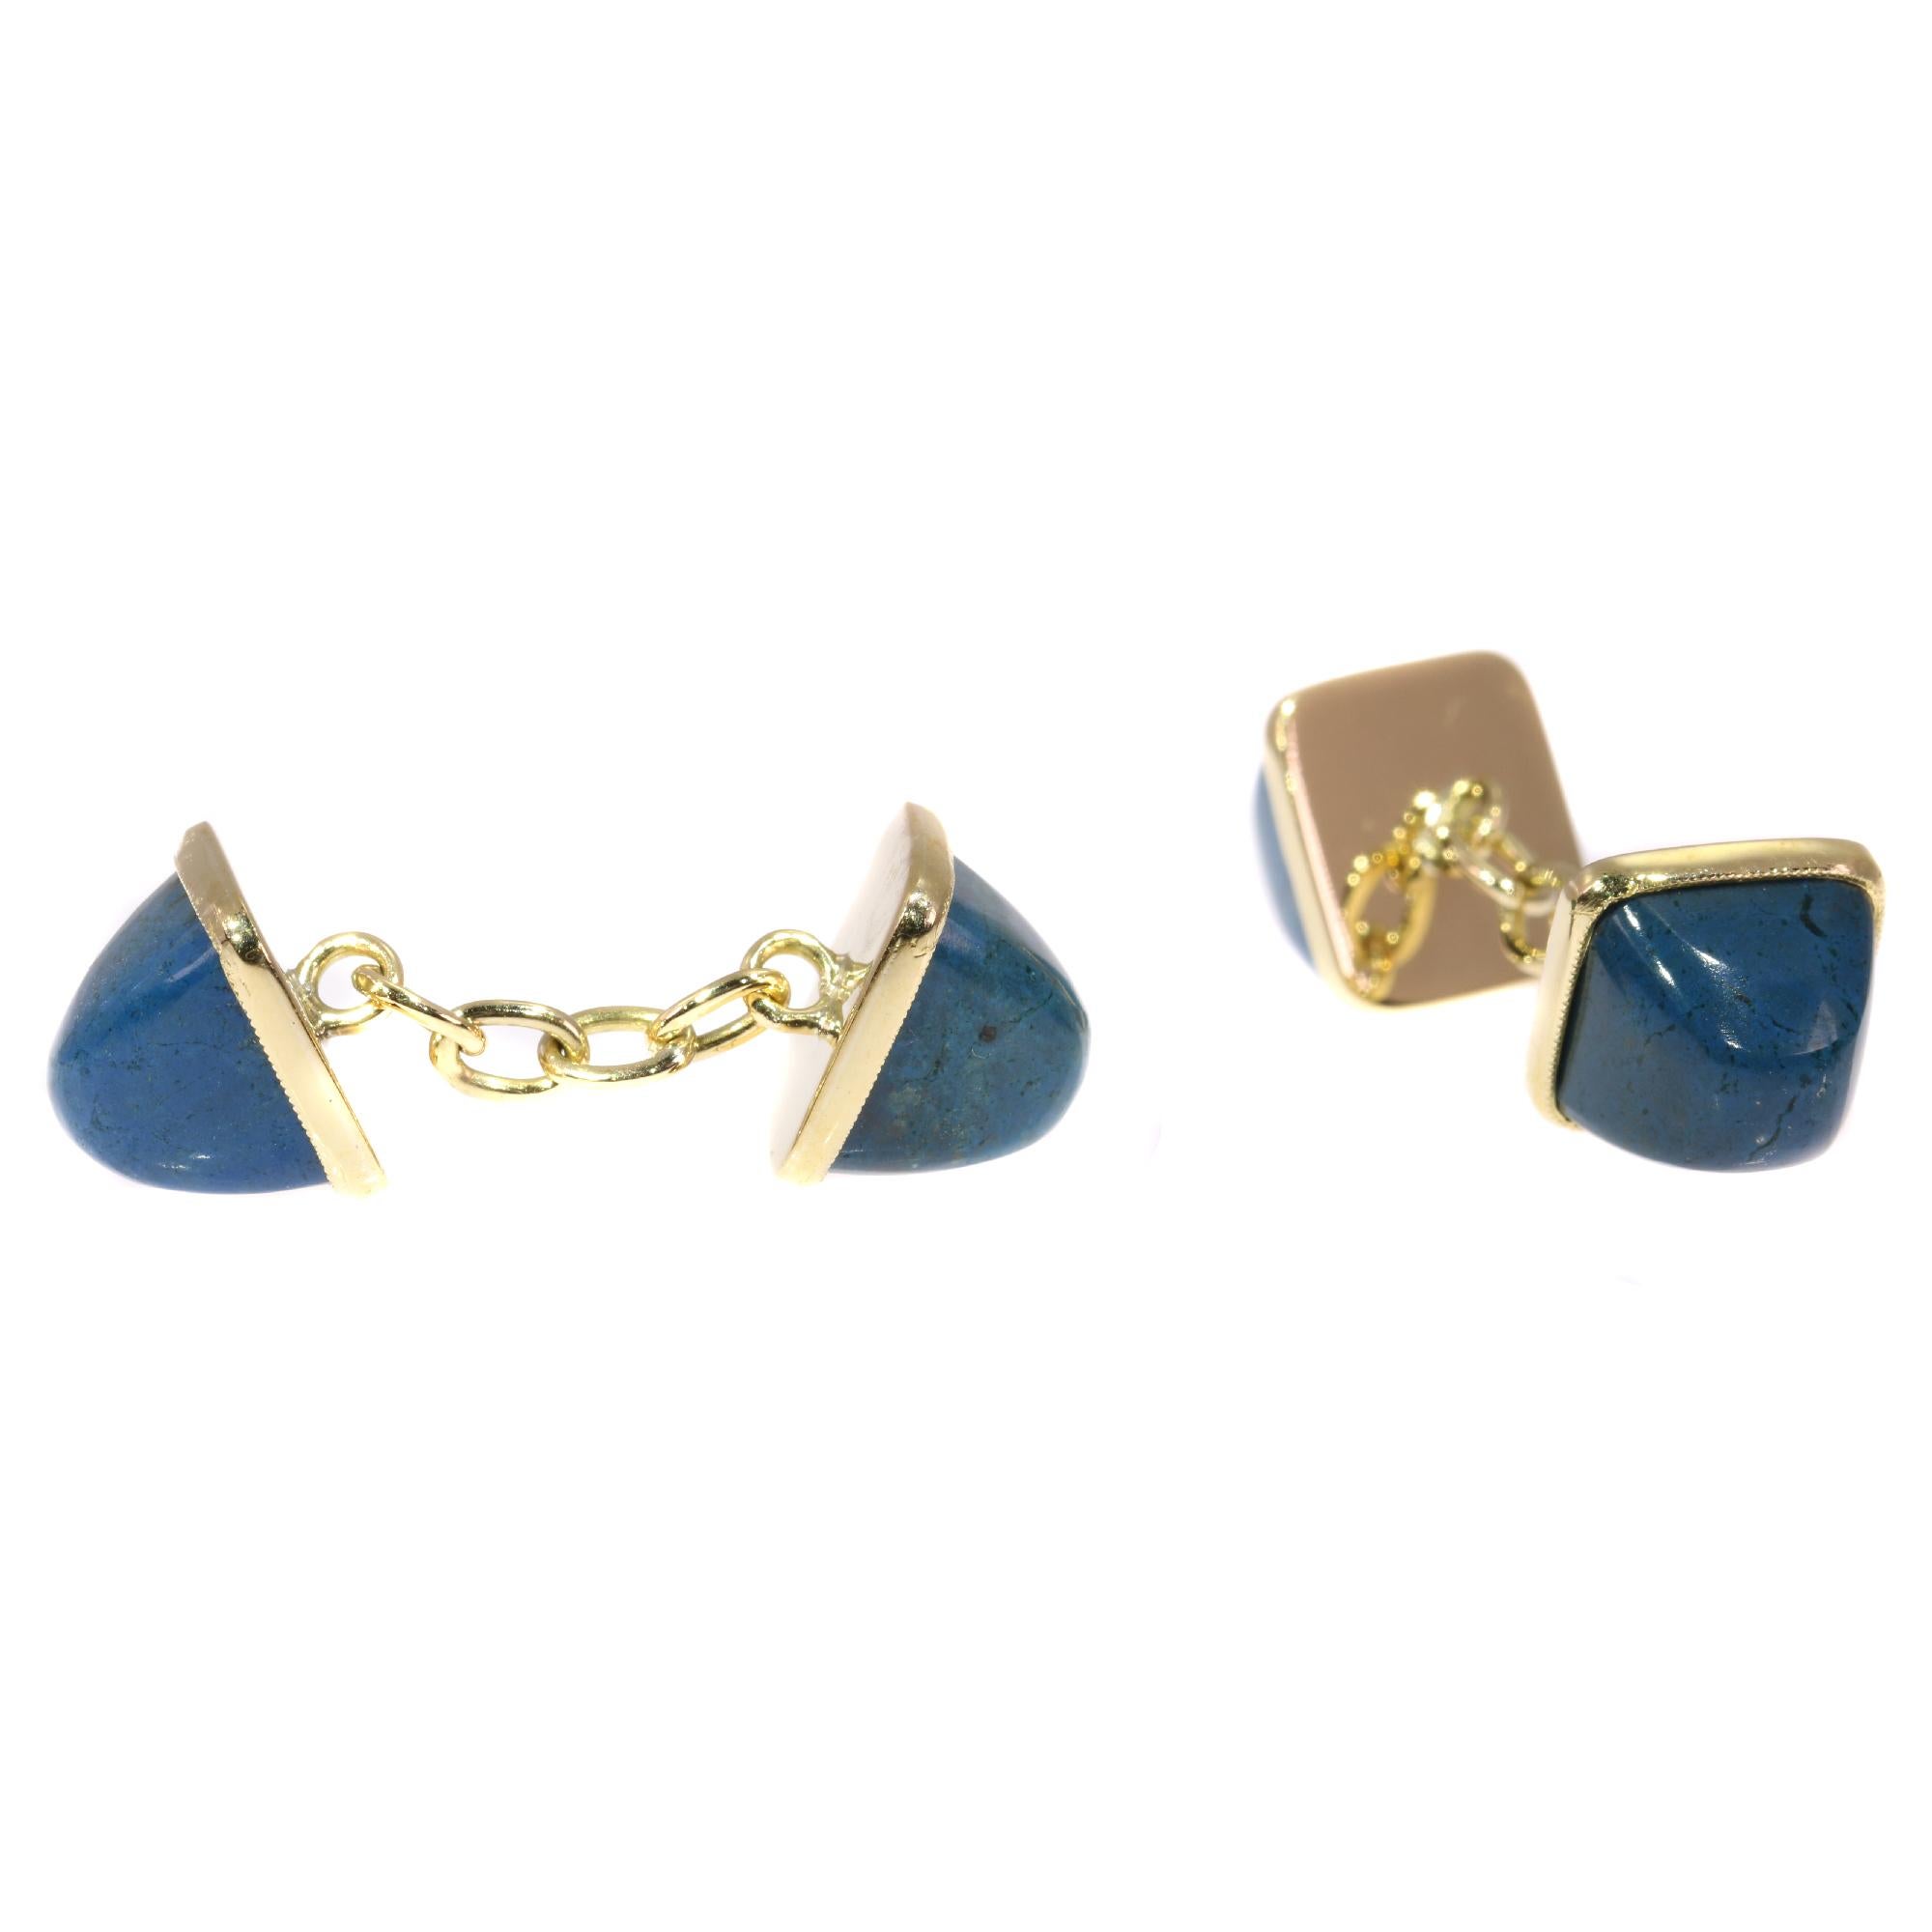 Antique jewelry object group: cufflinks

Condition: excellent condition

Country of origin: unknown

Style: Vintage Fifties (of the twentieth century)

Period: ca. 1950

Material: 18K yellow gold

Extra information: Pain de sucre cabochon - Pain de